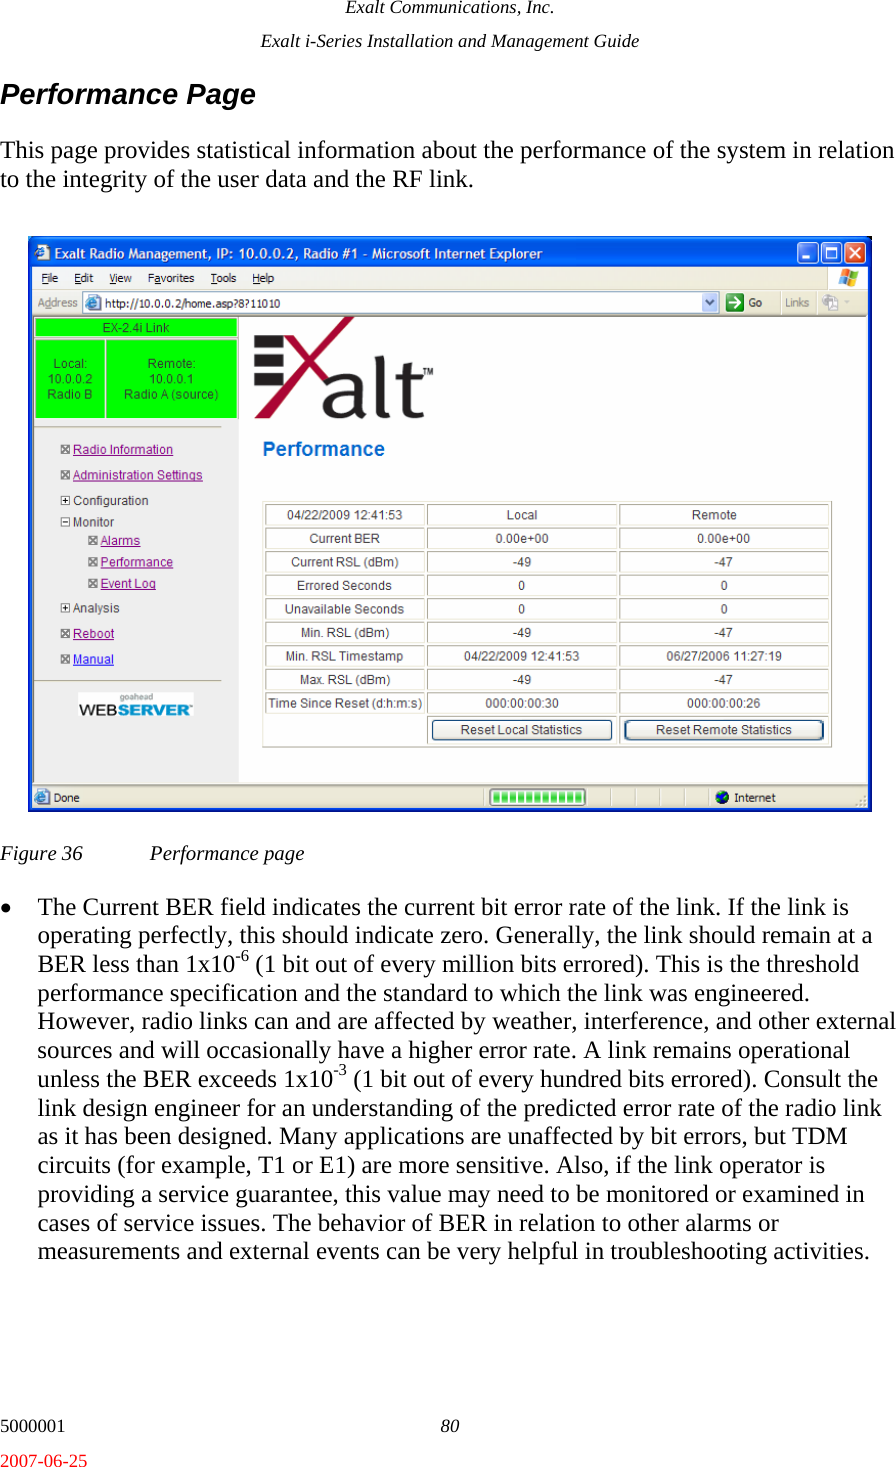 Exalt Communications, Inc. Exalt i-Series Installation and Management Guide 5000001  80 2007-06-25 Performance Page This page provides statistical information about the performance of the system in relation to the integrity of the user data and the RF link.  Figure 36  Performance page • The Current BER field indicates the current bit error rate of the link. If the link is operating perfectly, this should indicate zero. Generally, the link should remain at a BER less than 1x10-6 (1 bit out of every million bits errored). This is the threshold performance specification and the standard to which the link was engineered. However, radio links can and are affected by weather, interference, and other external sources and will occasionally have a higher error rate. A link remains operational unless the BER exceeds 1x10-3 (1 bit out of every hundred bits errored). Consult the link design engineer for an understanding of the predicted error rate of the radio link as it has been designed. Many applications are unaffected by bit errors, but TDM circuits (for example, T1 or E1) are more sensitive. Also, if the link operator is providing a service guarantee, this value may need to be monitored or examined in cases of service issues. The behavior of BER in relation to other alarms or measurements and external events can be very helpful in troubleshooting activities. 